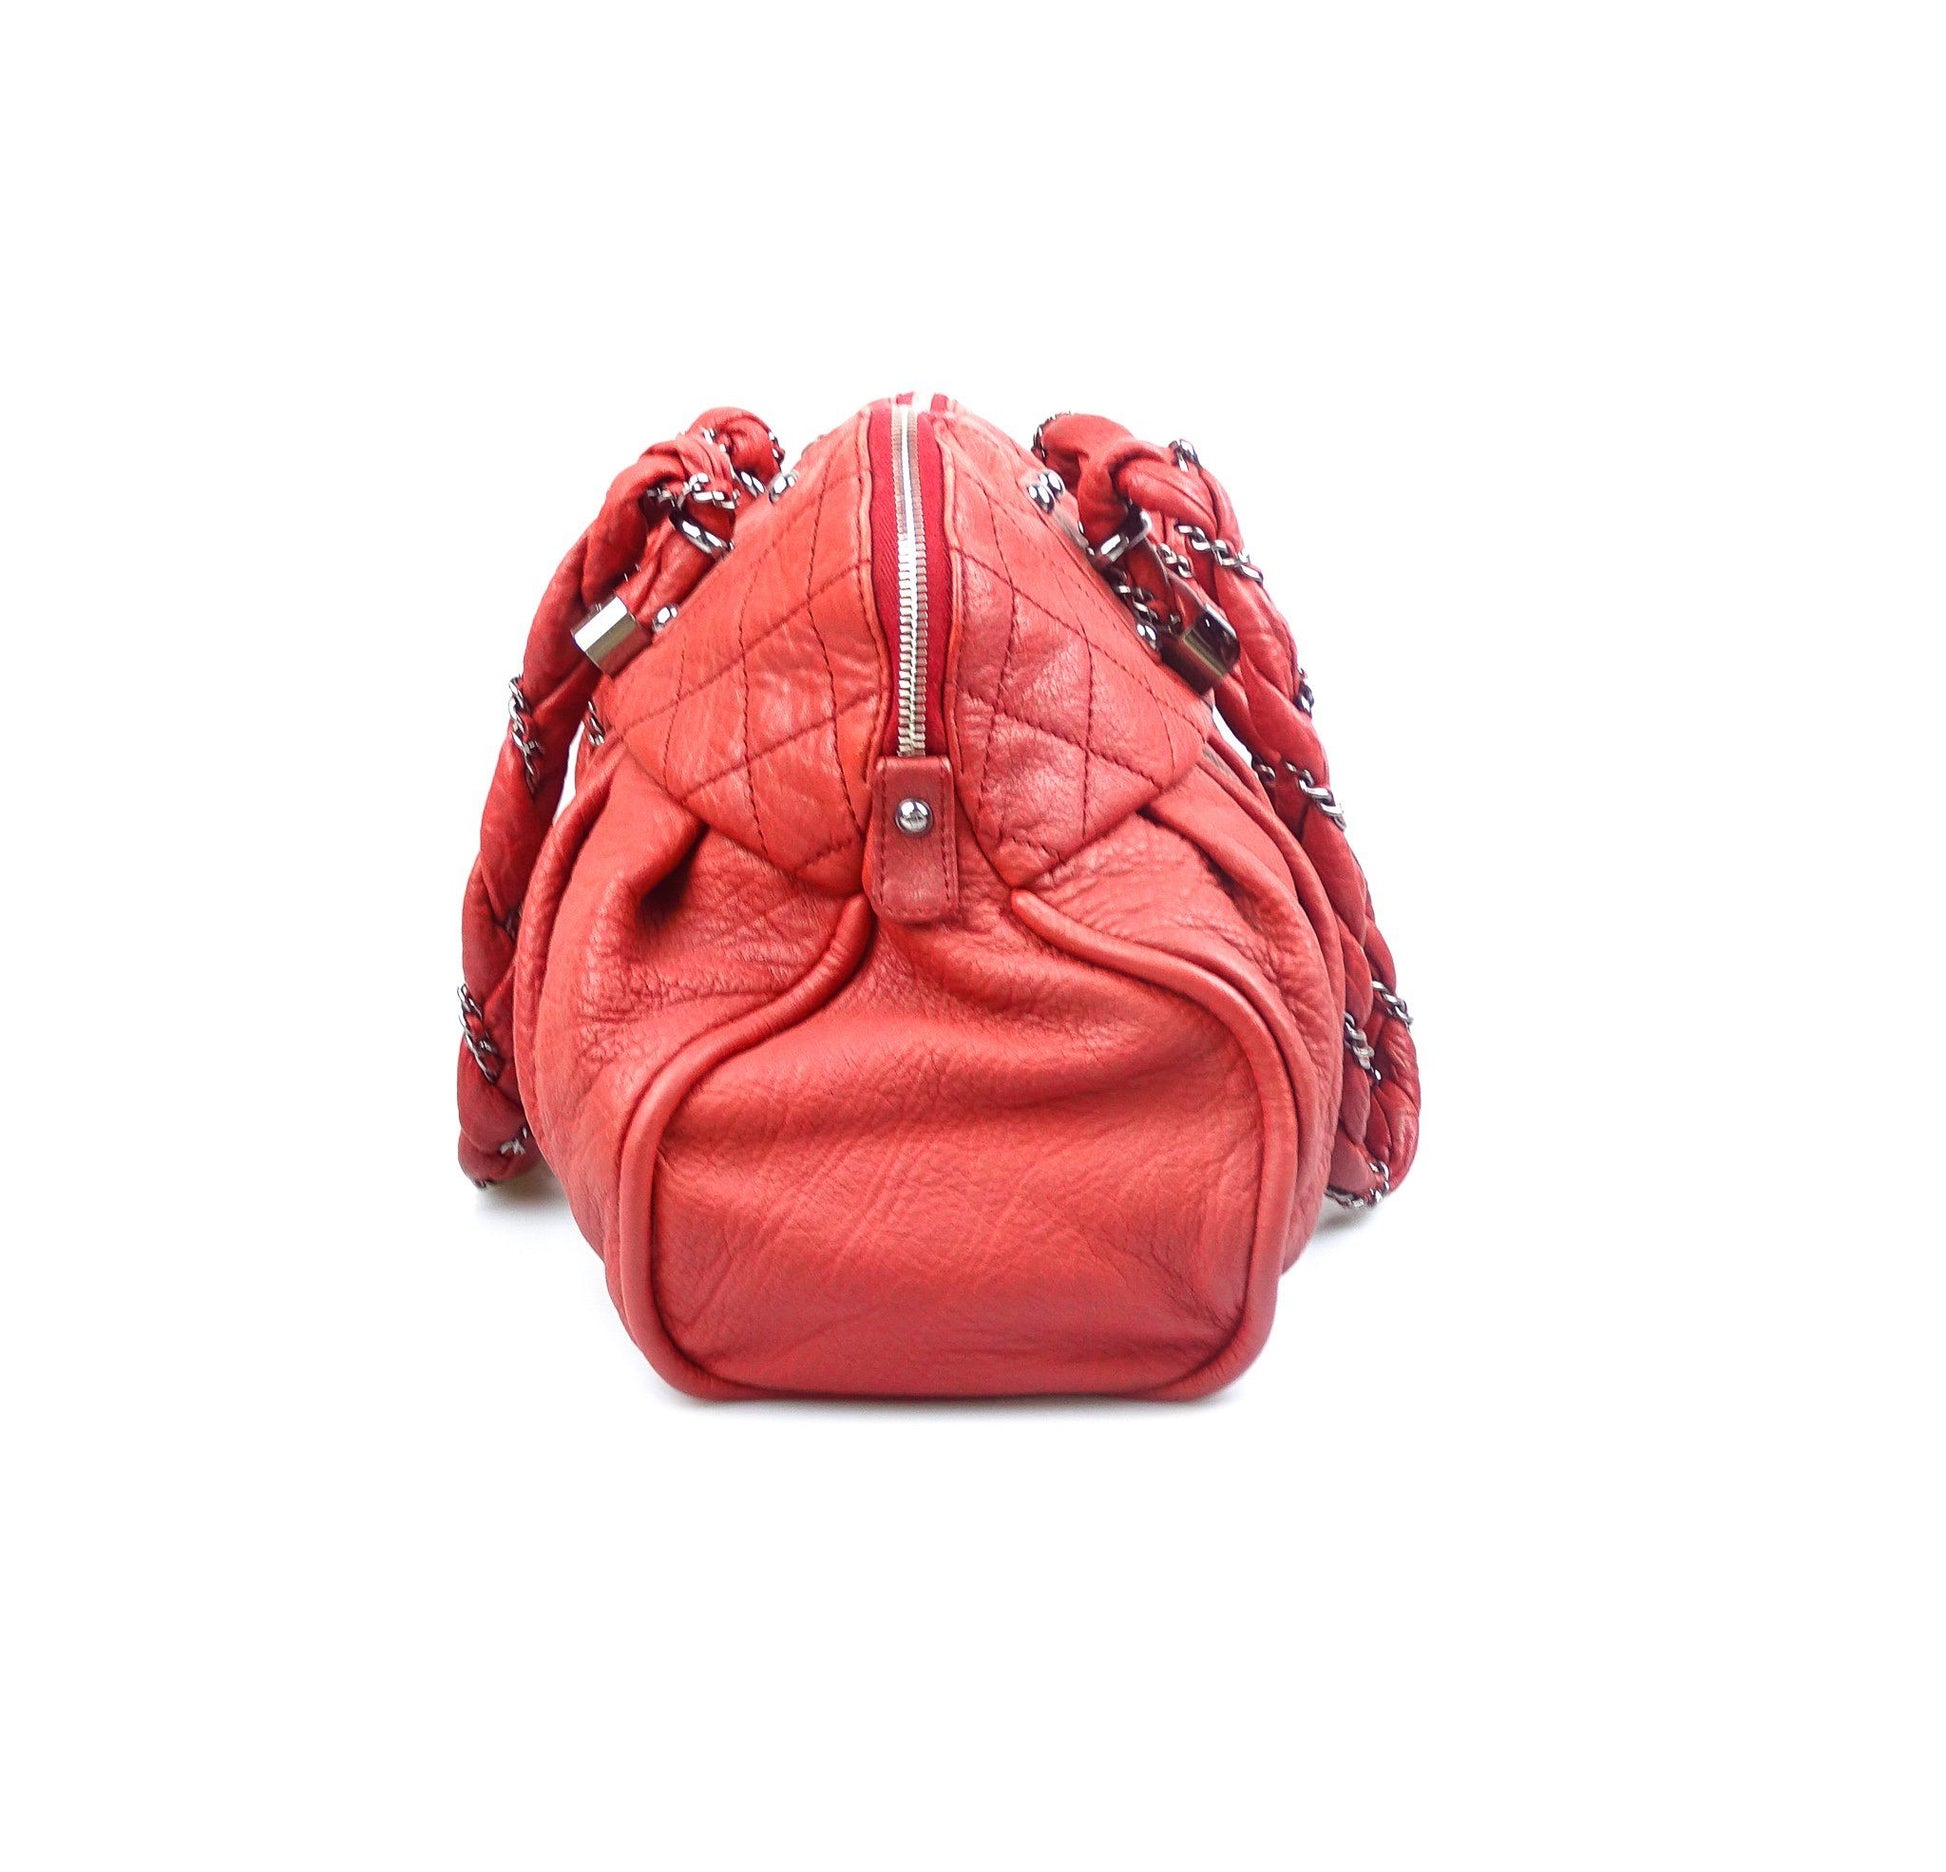 Chanel Lady Braid Large Shoulder Bag Red Bags Chanel 